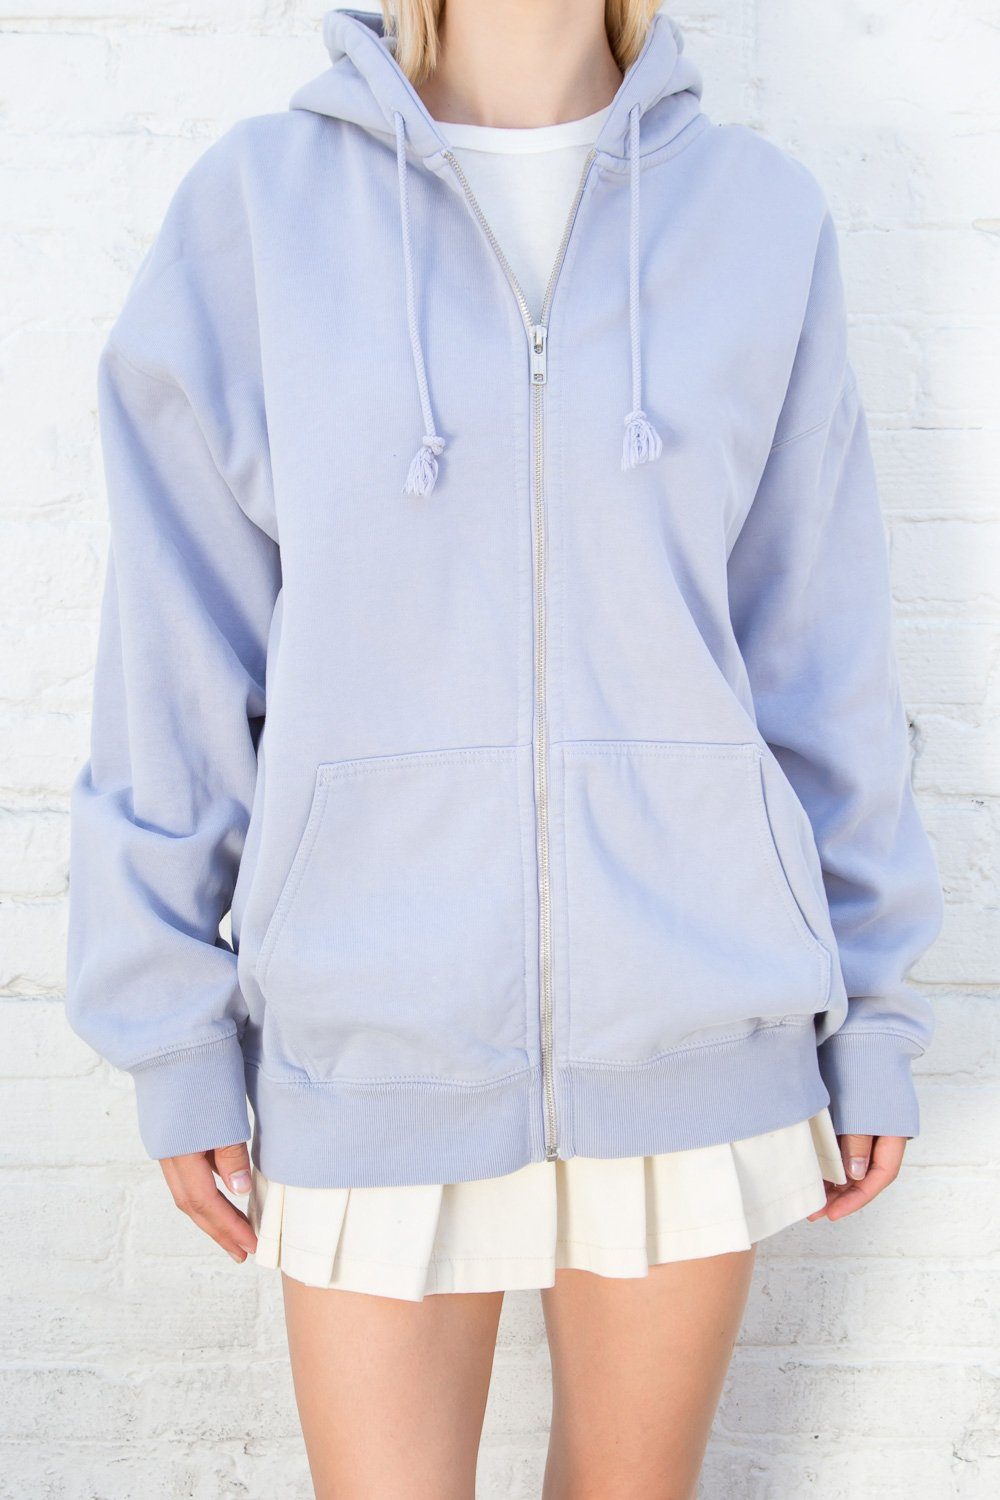 brandy melville hoodies, Women's Fashion, Coats, Jackets and